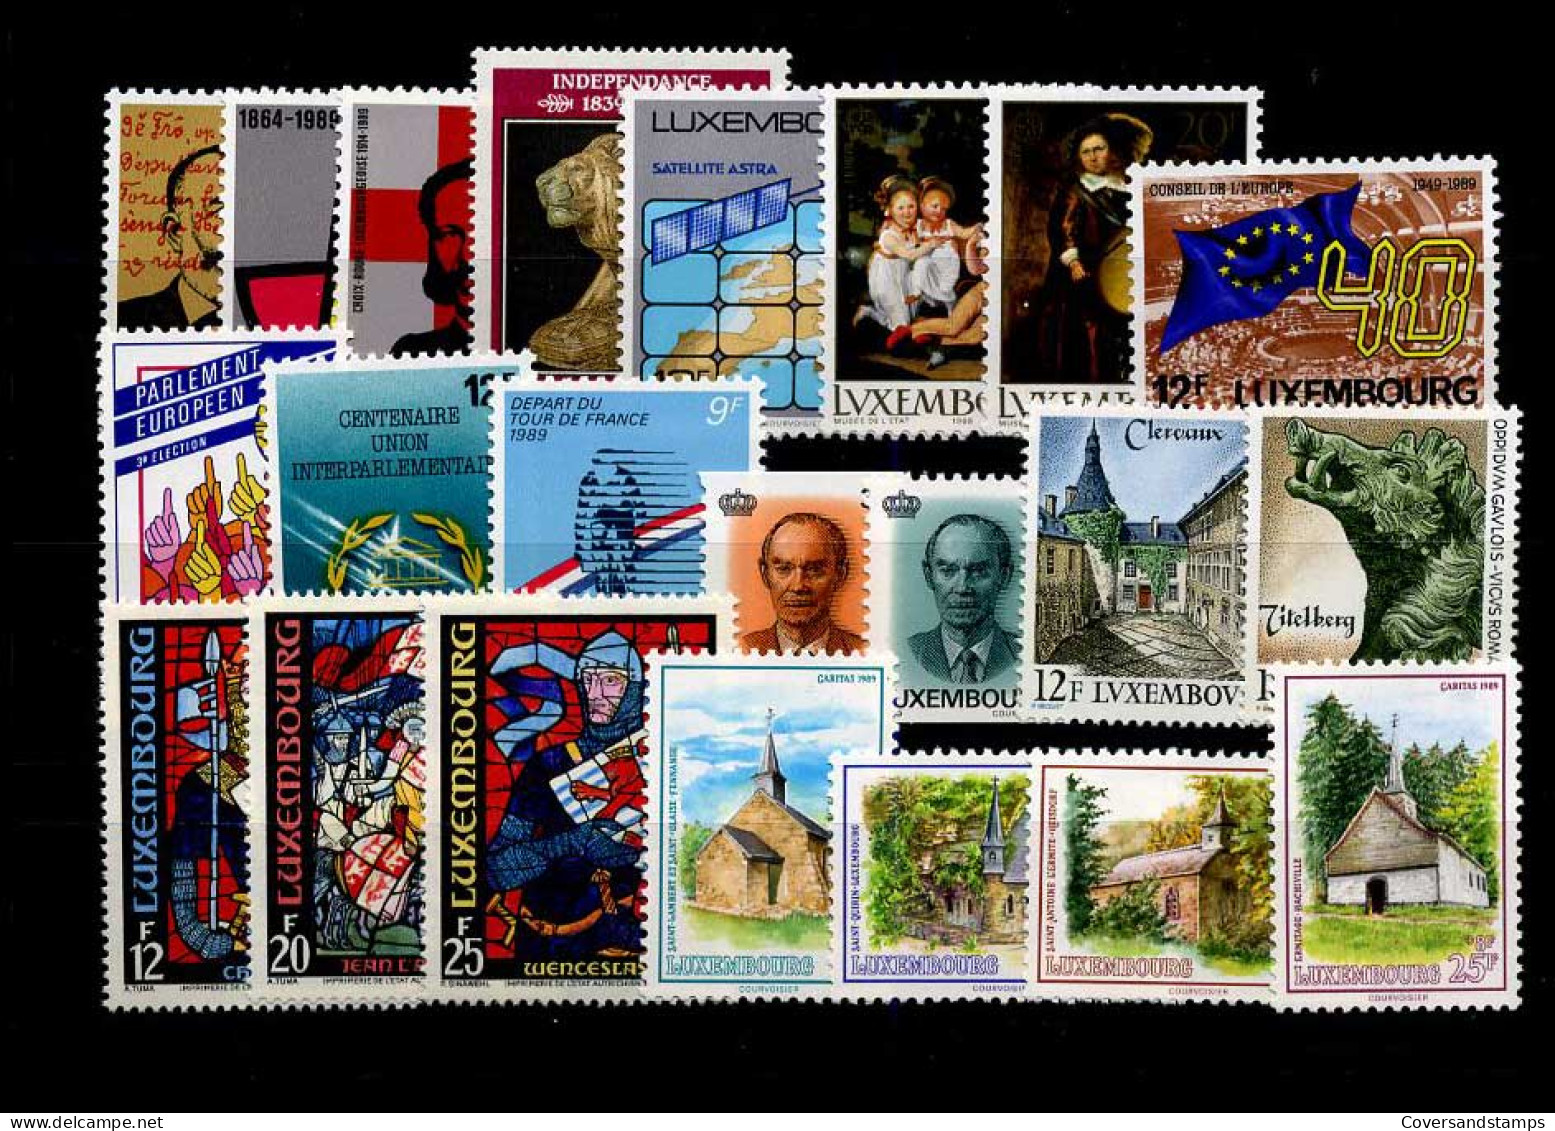 Luxembourg - Yearset 1989 - MNH - Annate Complete